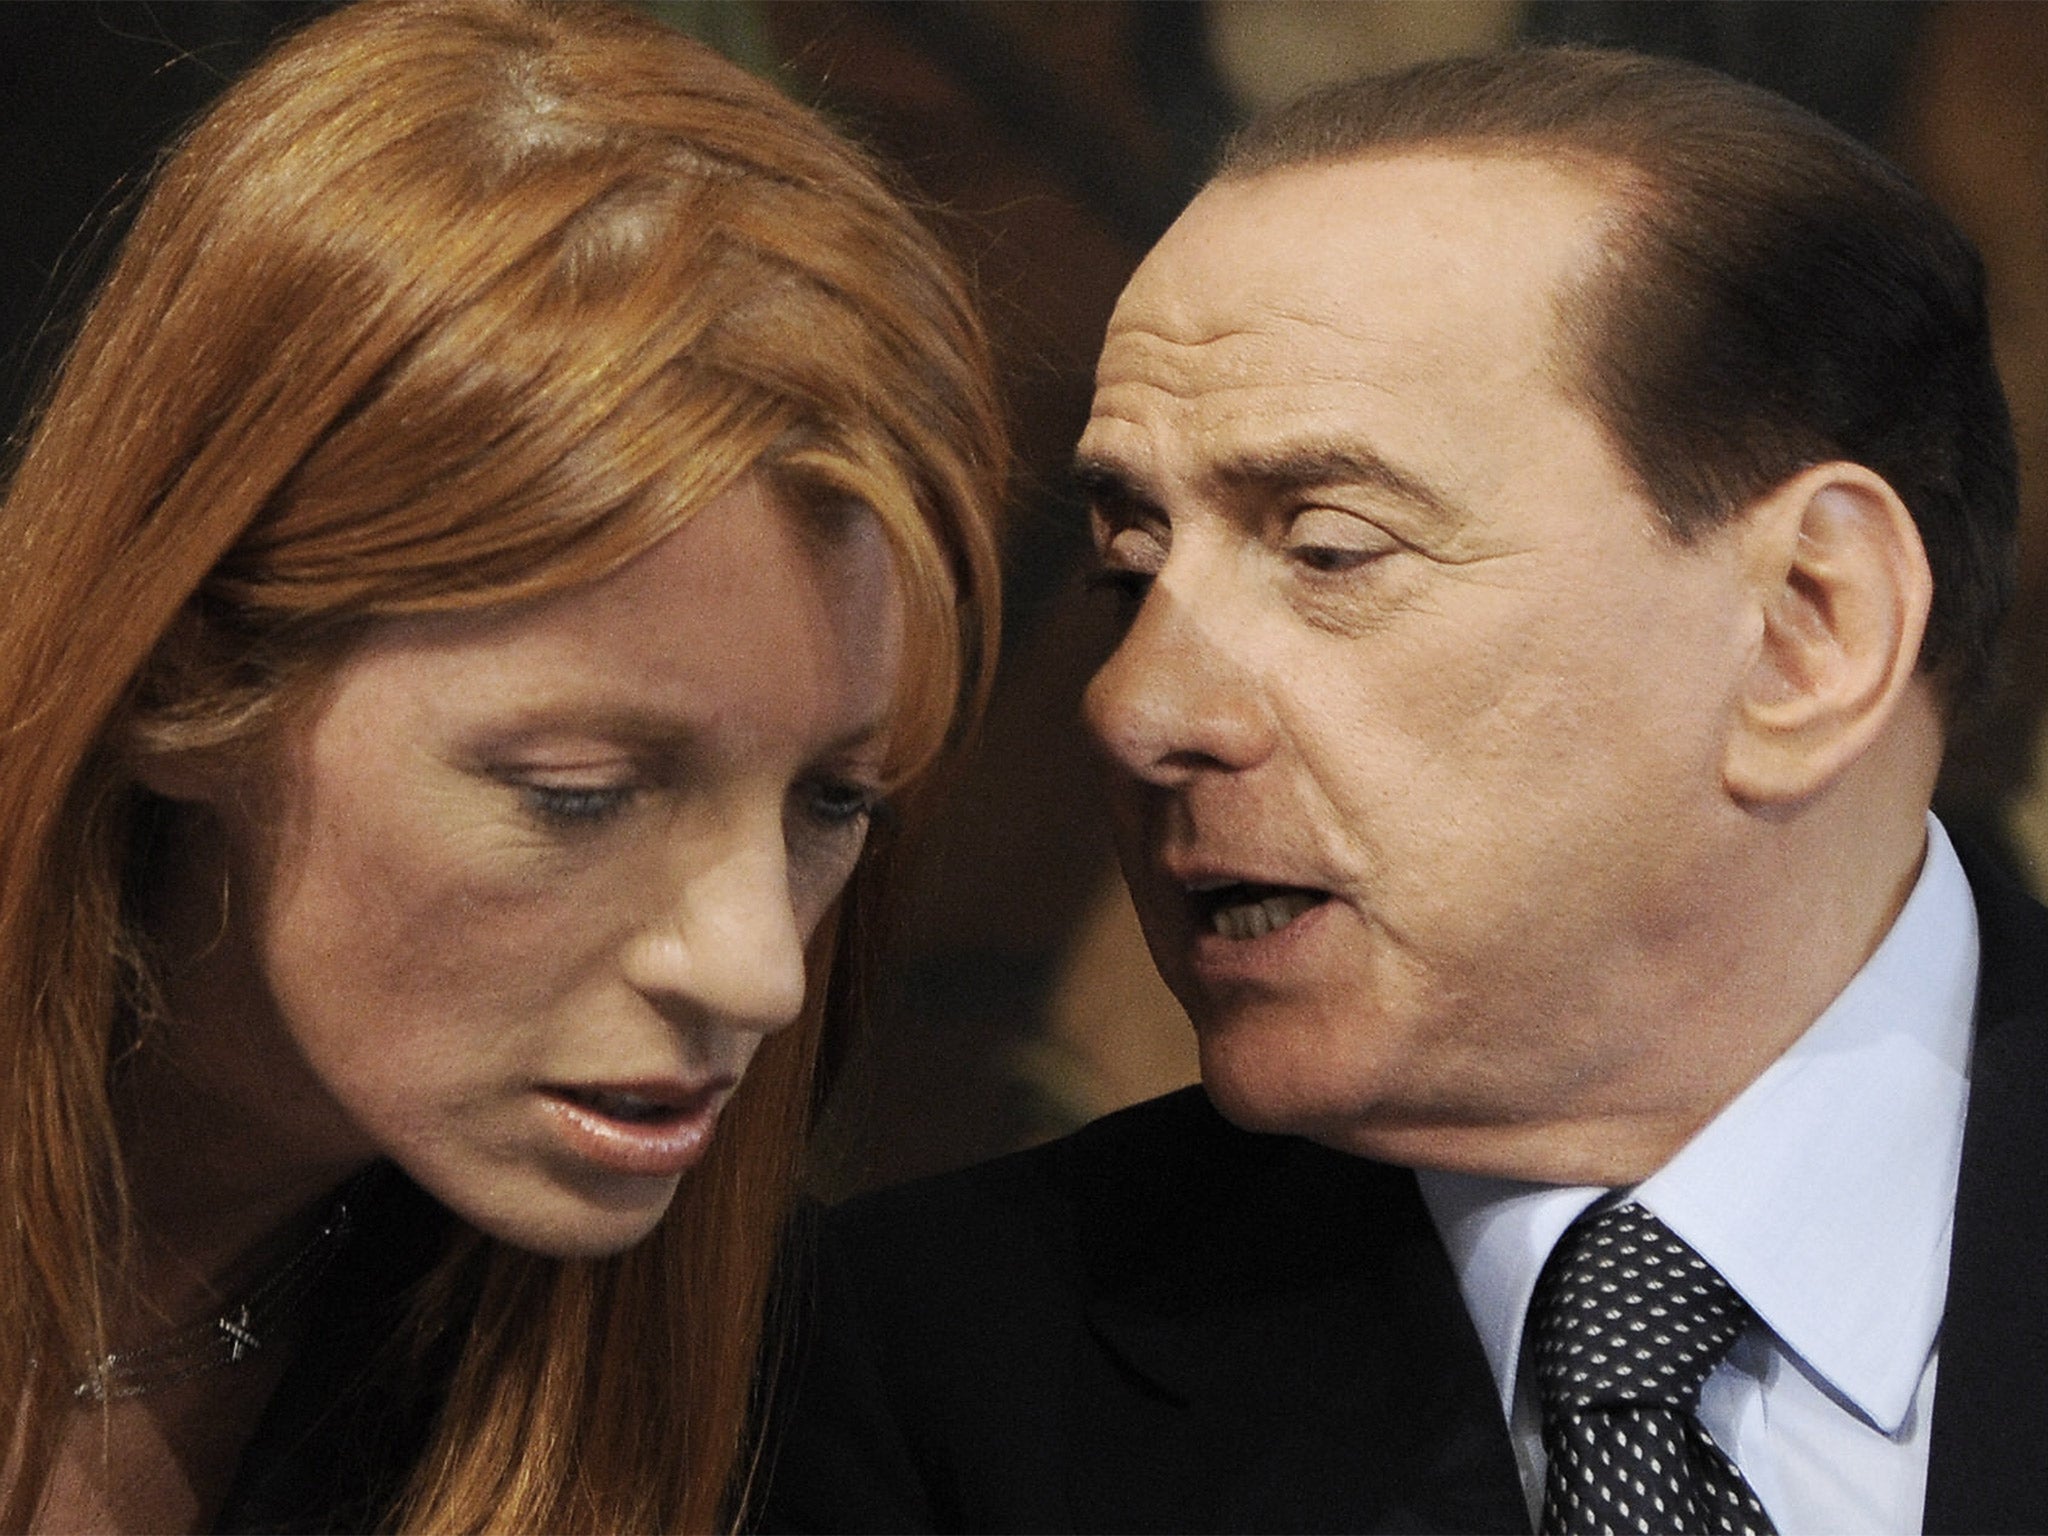 Silvio Berlusconi, then Italian prime minister, with Michela Brambilla, an animal rights activist and the minister for tourism in his government, in 2009